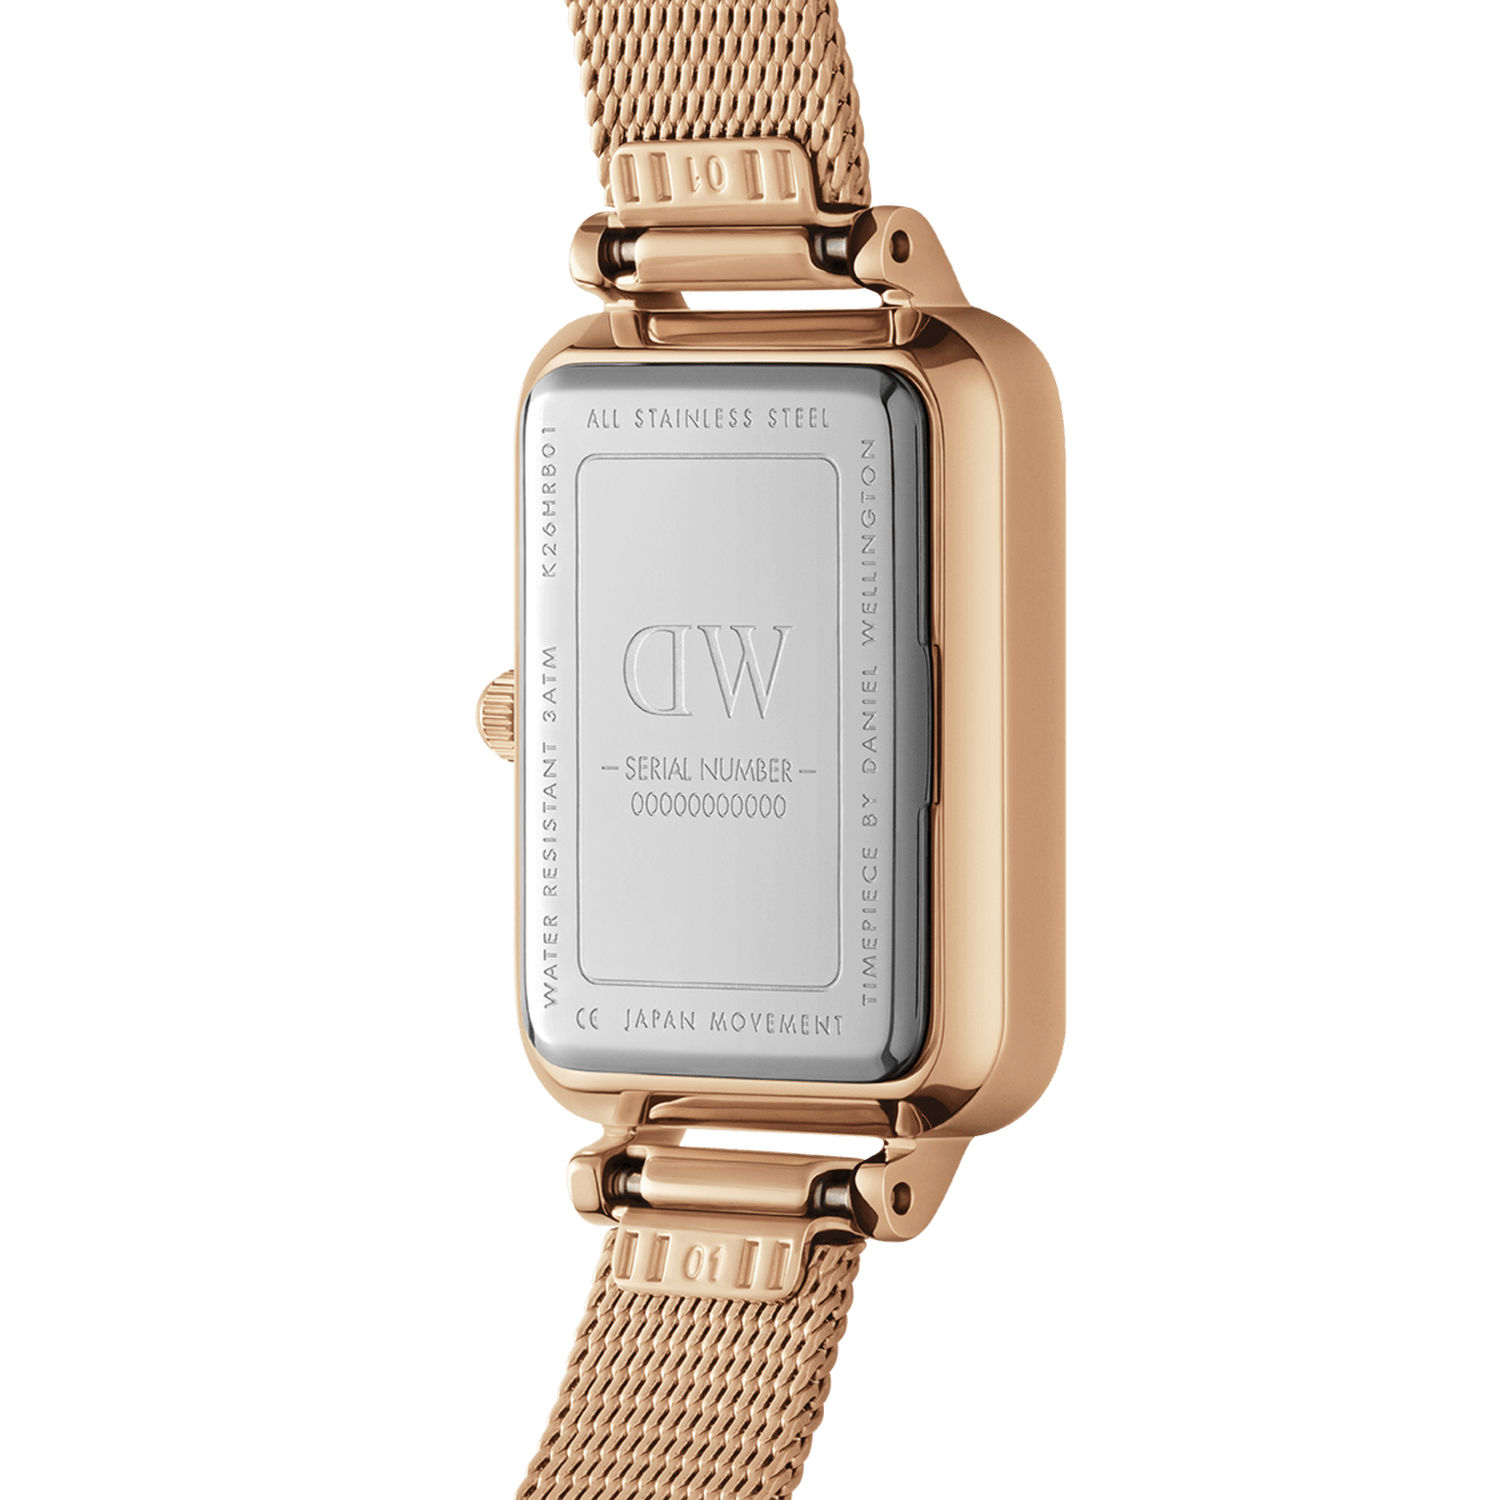 Quadro - Square watch for women in rose gold | DW